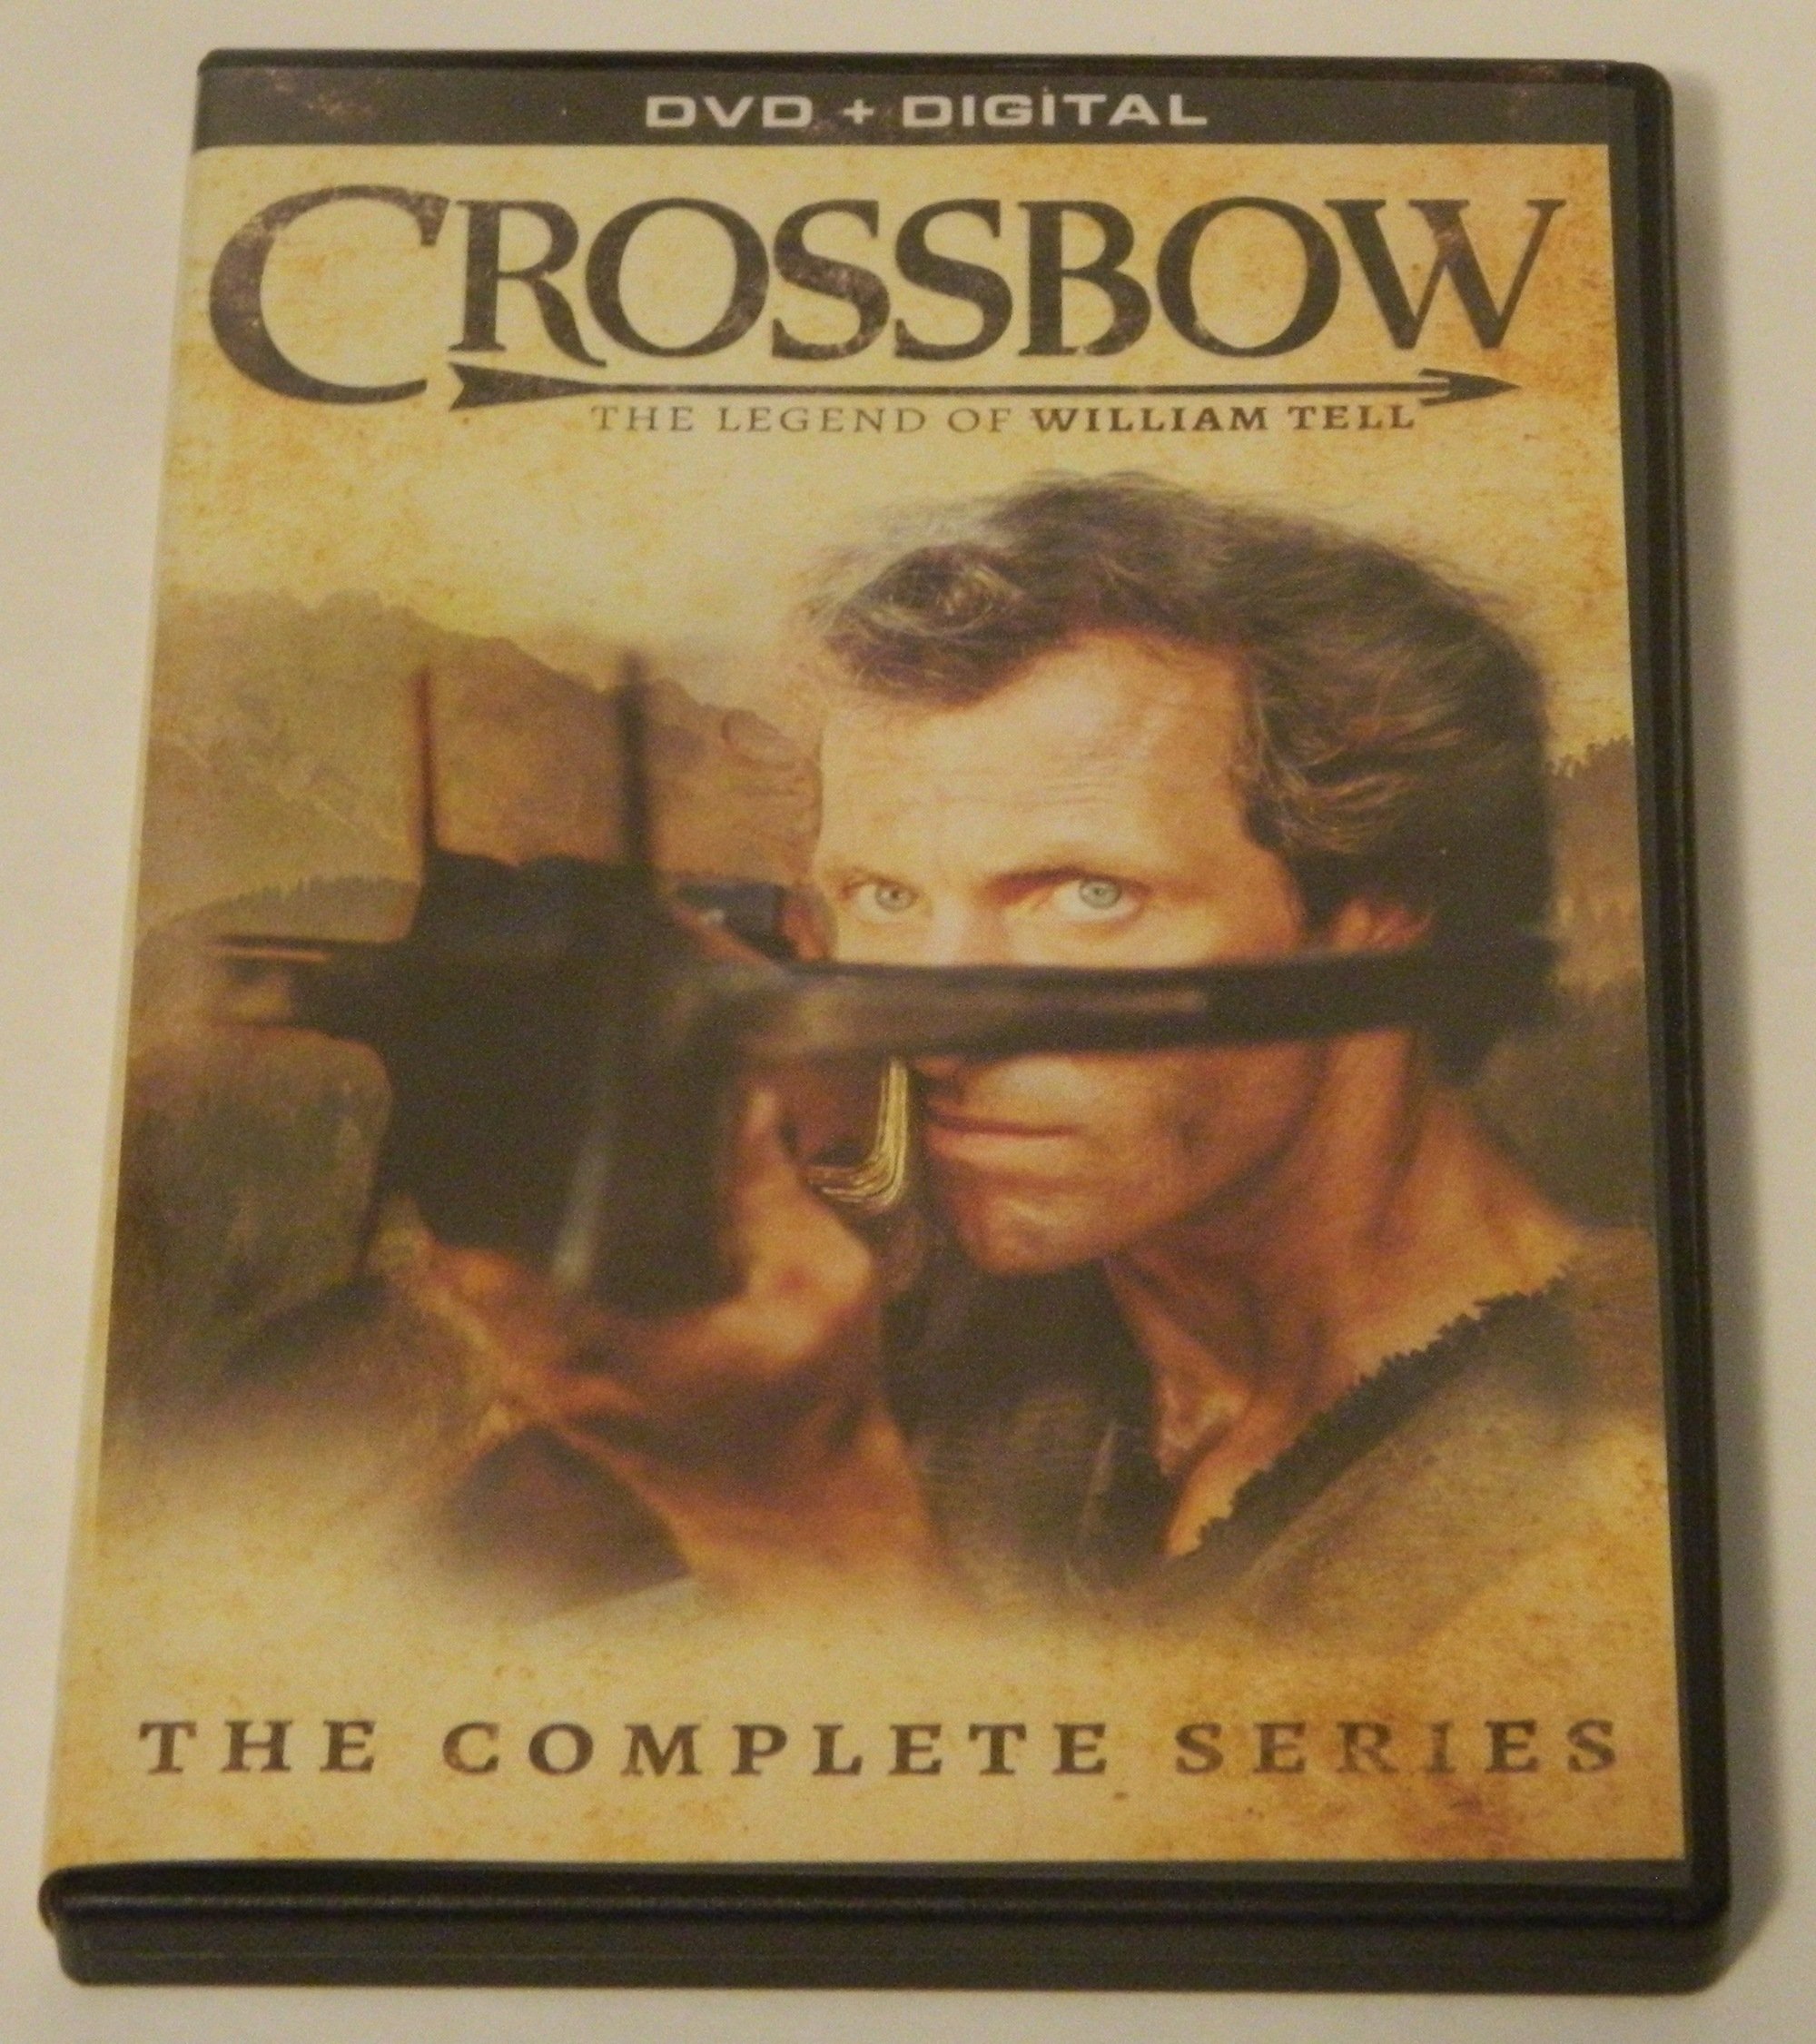 Crossbow: The Complete Series DVD Review